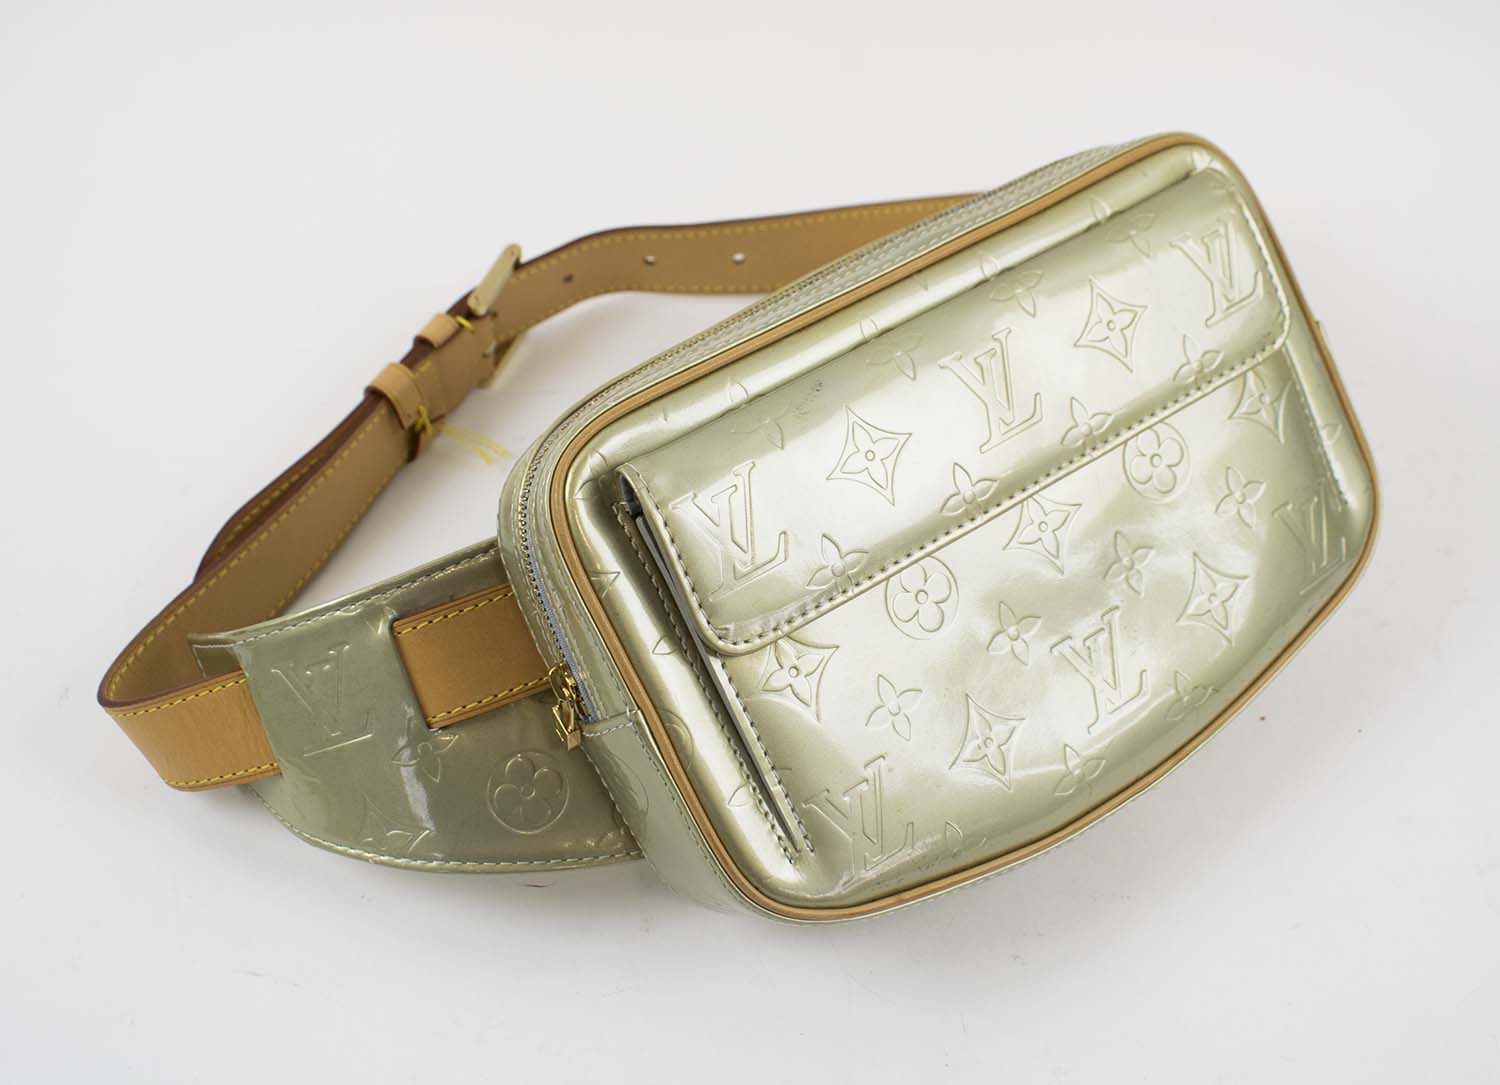 LOUIS VUITTON VERNIS FULTON WAIST BAG, gold patent vernis monogram leather  with leather trims and adjustable waistband, brass tone hardware, full zip  closure and front pocket, 23cm x 14cm H x 4.5cm.